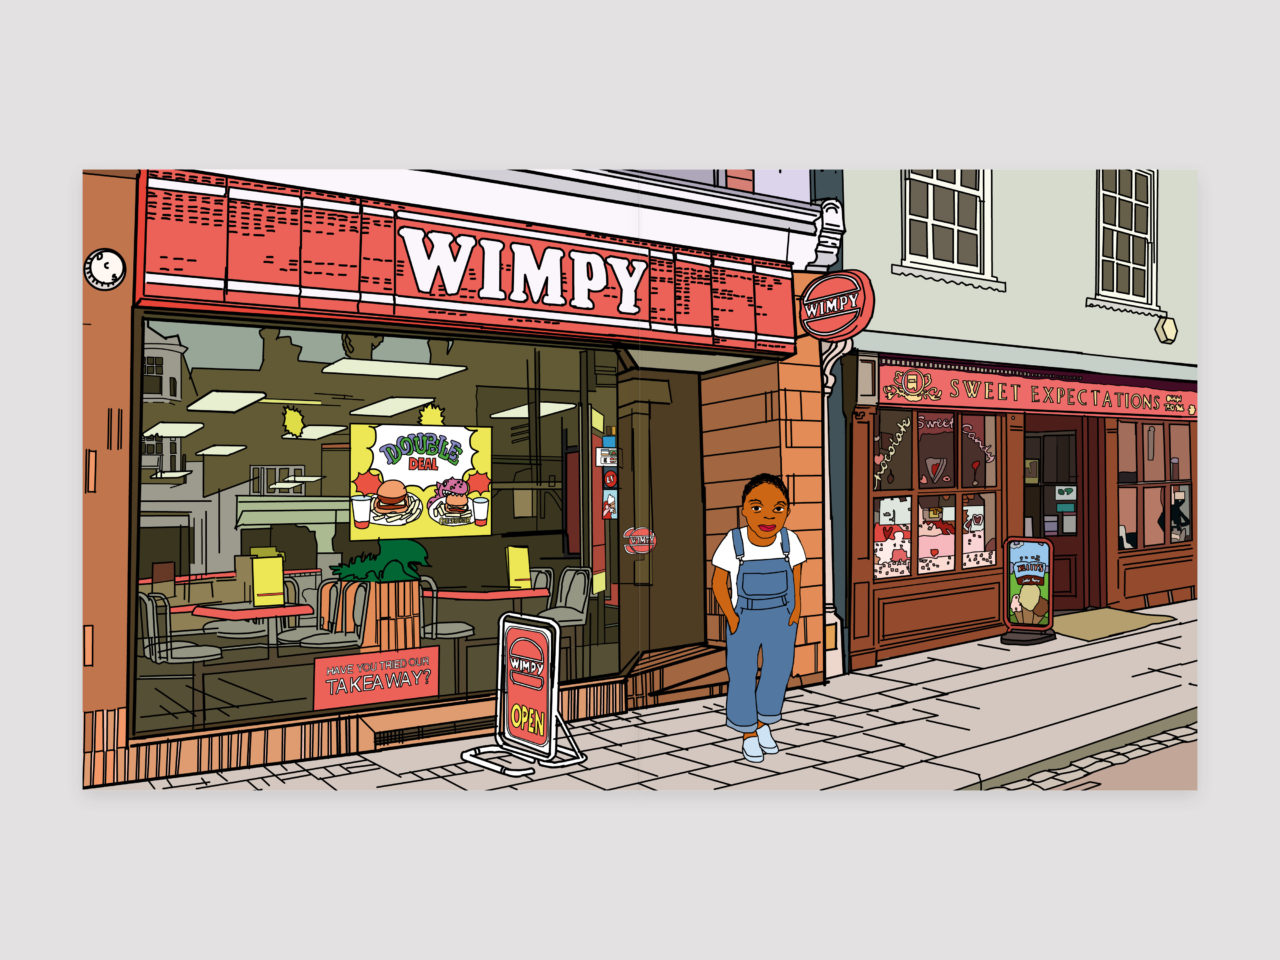 An illustration of a person in dungarees standing outside a Wimpy on a street